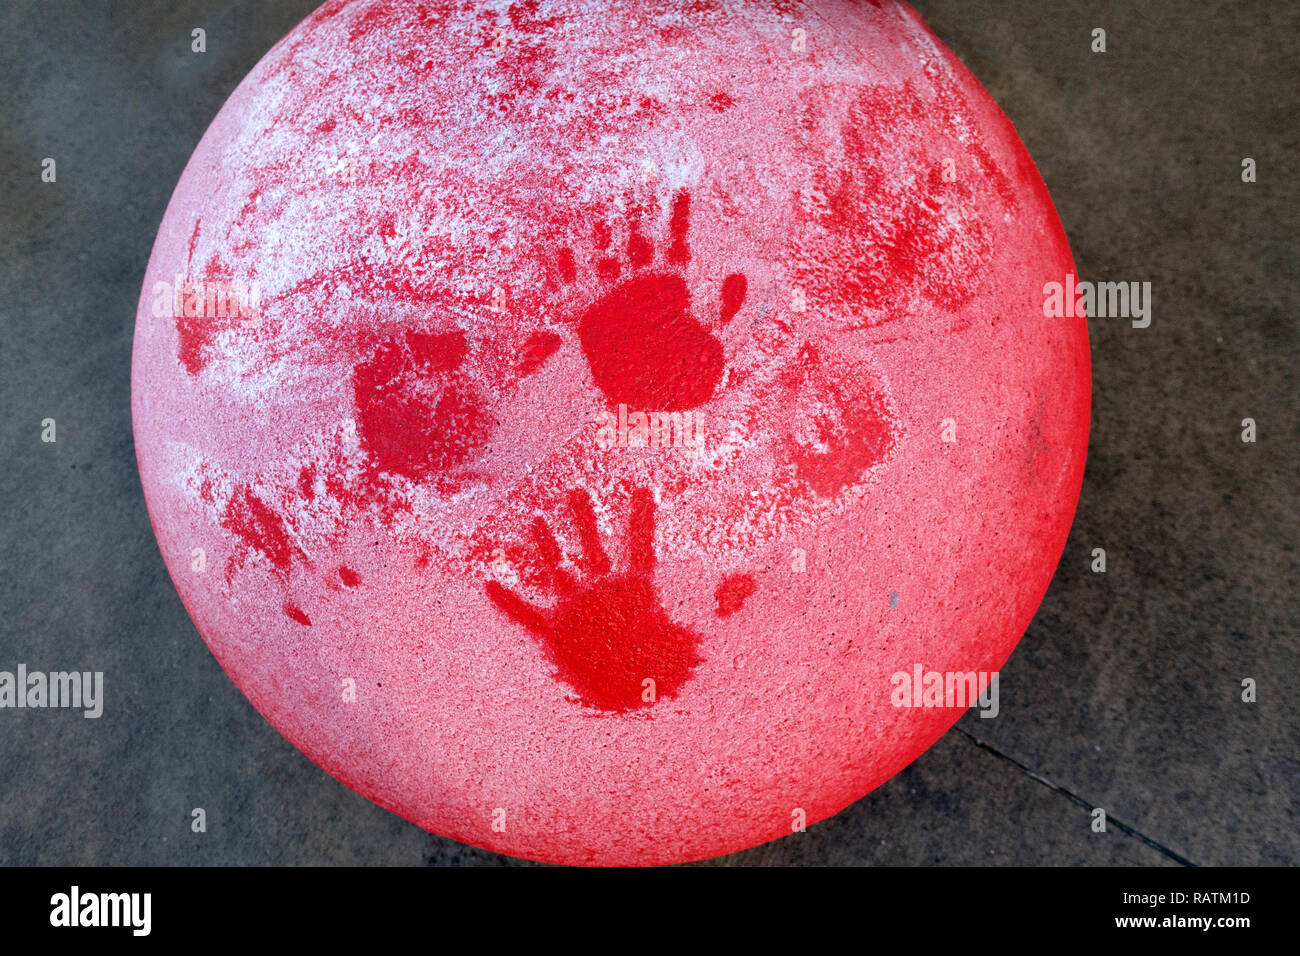 Artistic surface of a red traffic standard with hand prints in the snow. St Paul Minnesota MN USA Stock Photo